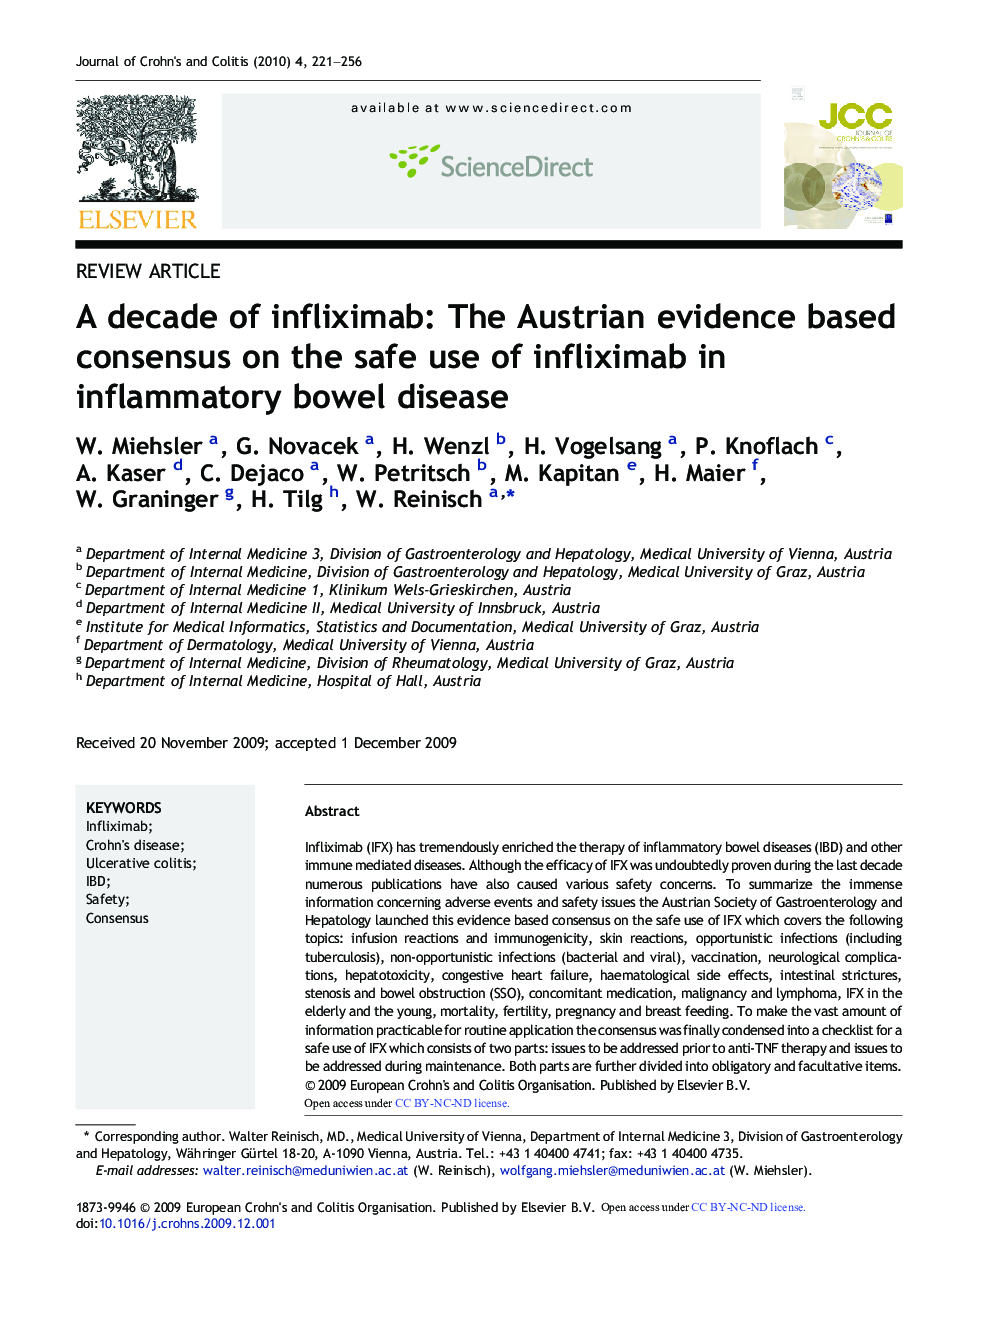 Review ArticleA decade of infliximab: The Austrian evidence based consensus on the safe use of infliximab in inflammatory bowel disease